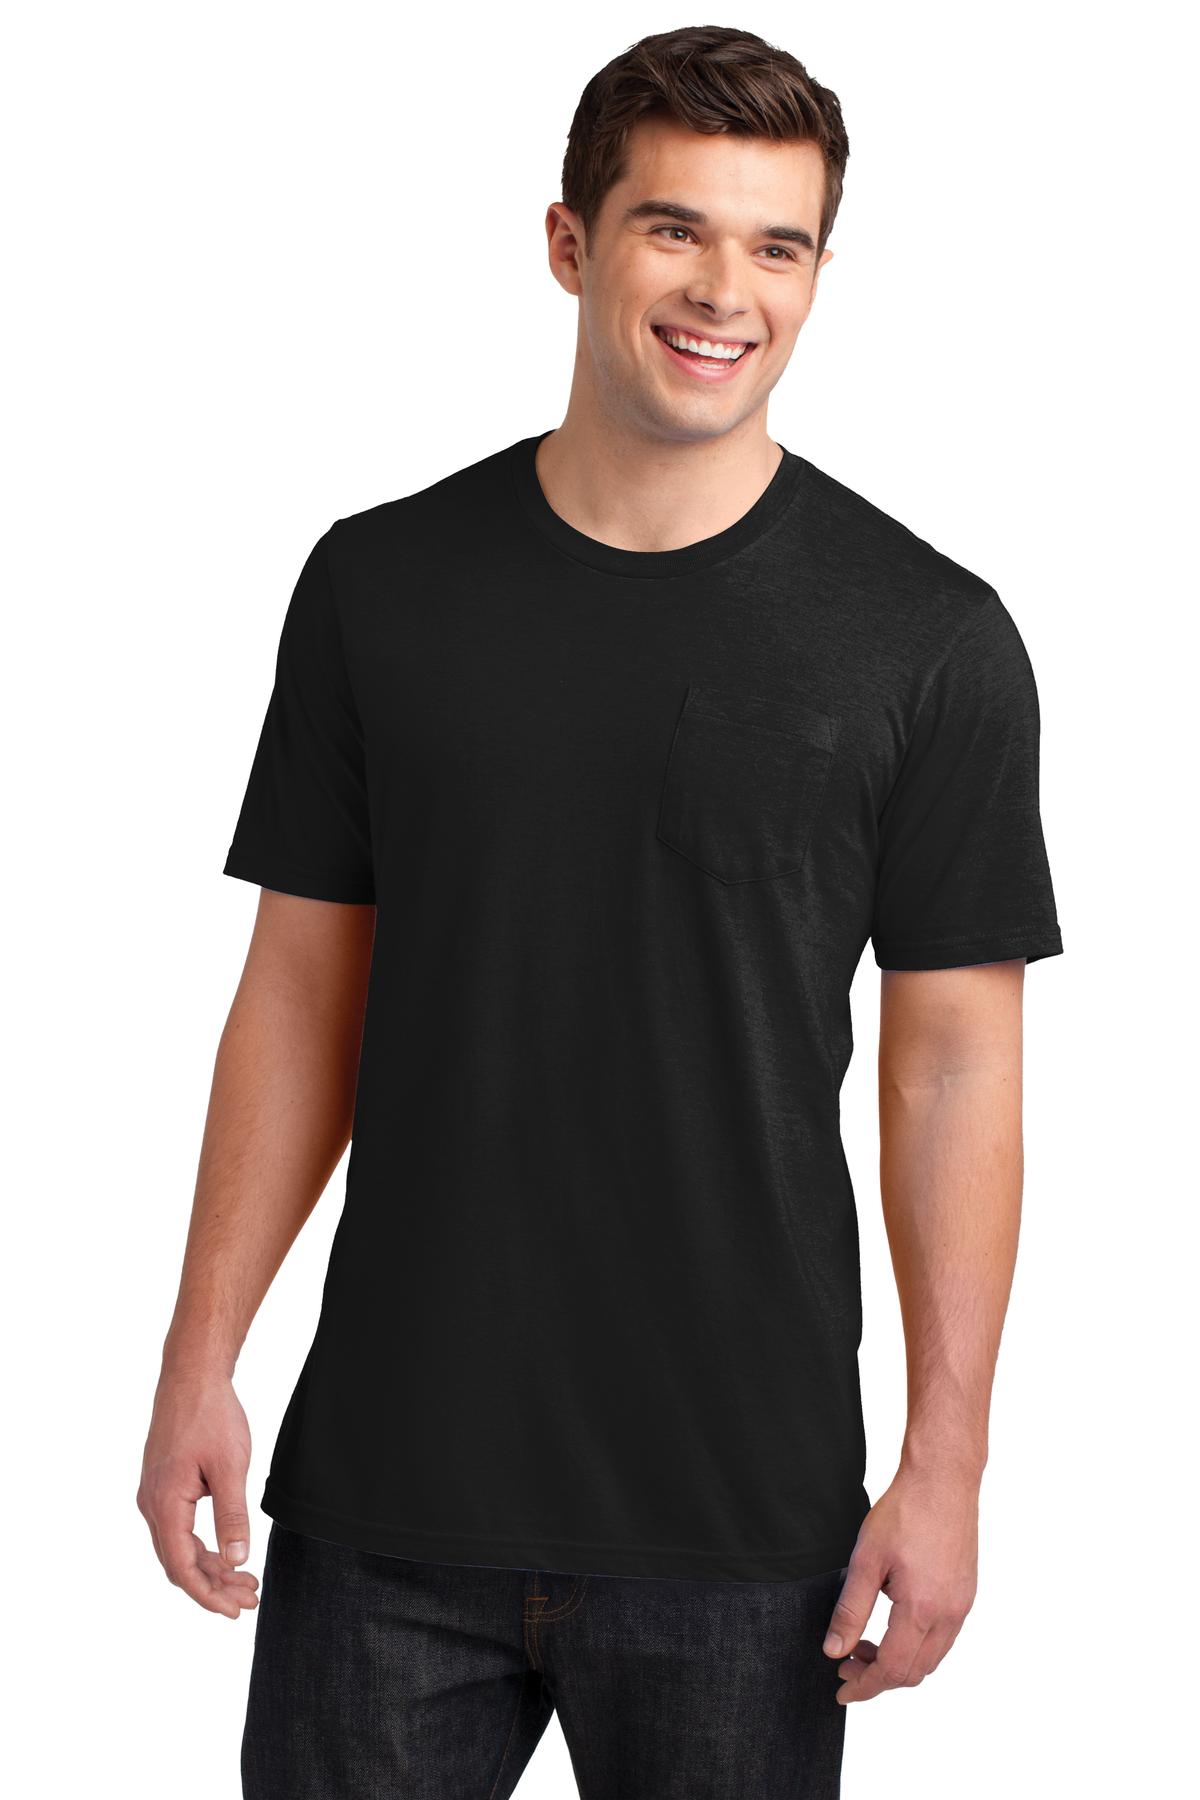 District Very Important T-Shirt with Pocket - DT6000P